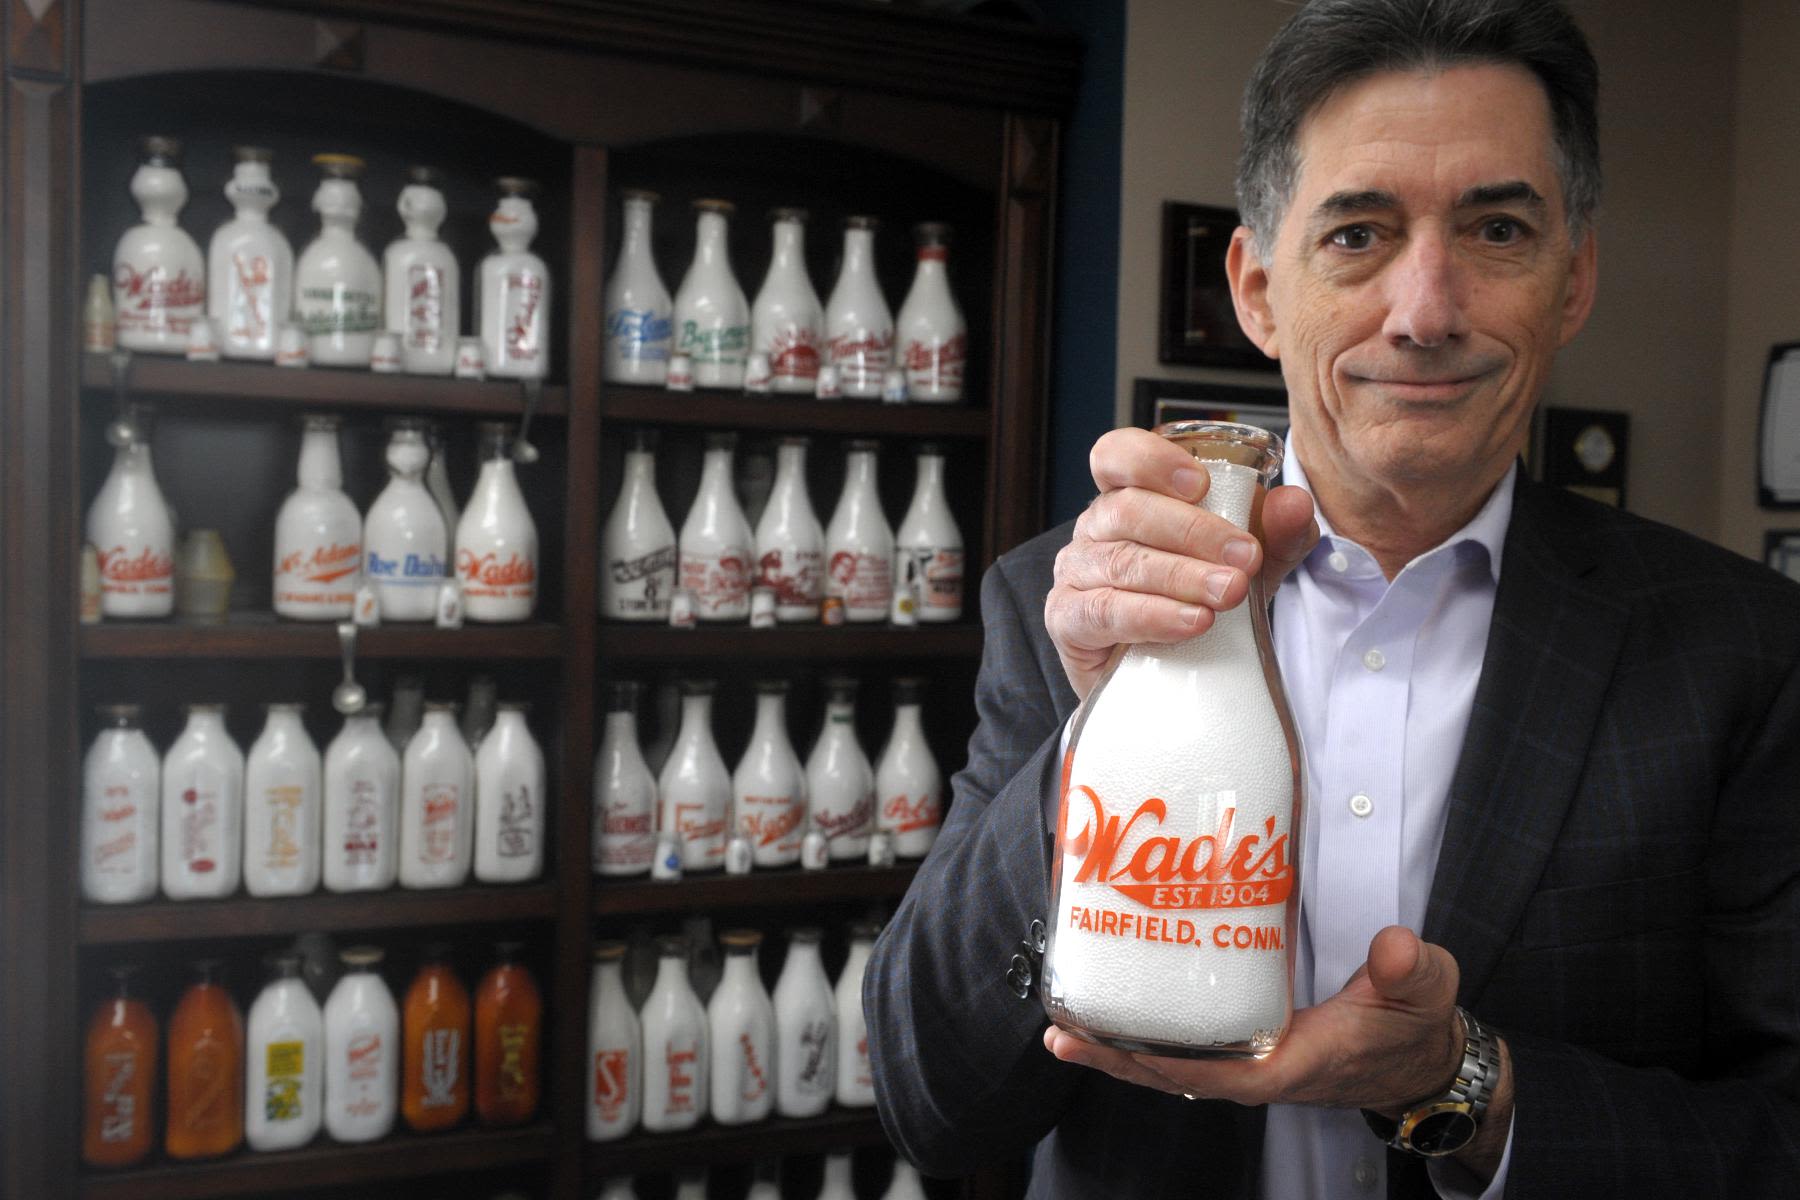 Doug Wade out as head of Bridgeport's Wade's Dairy amid 'differences of opinion' with family